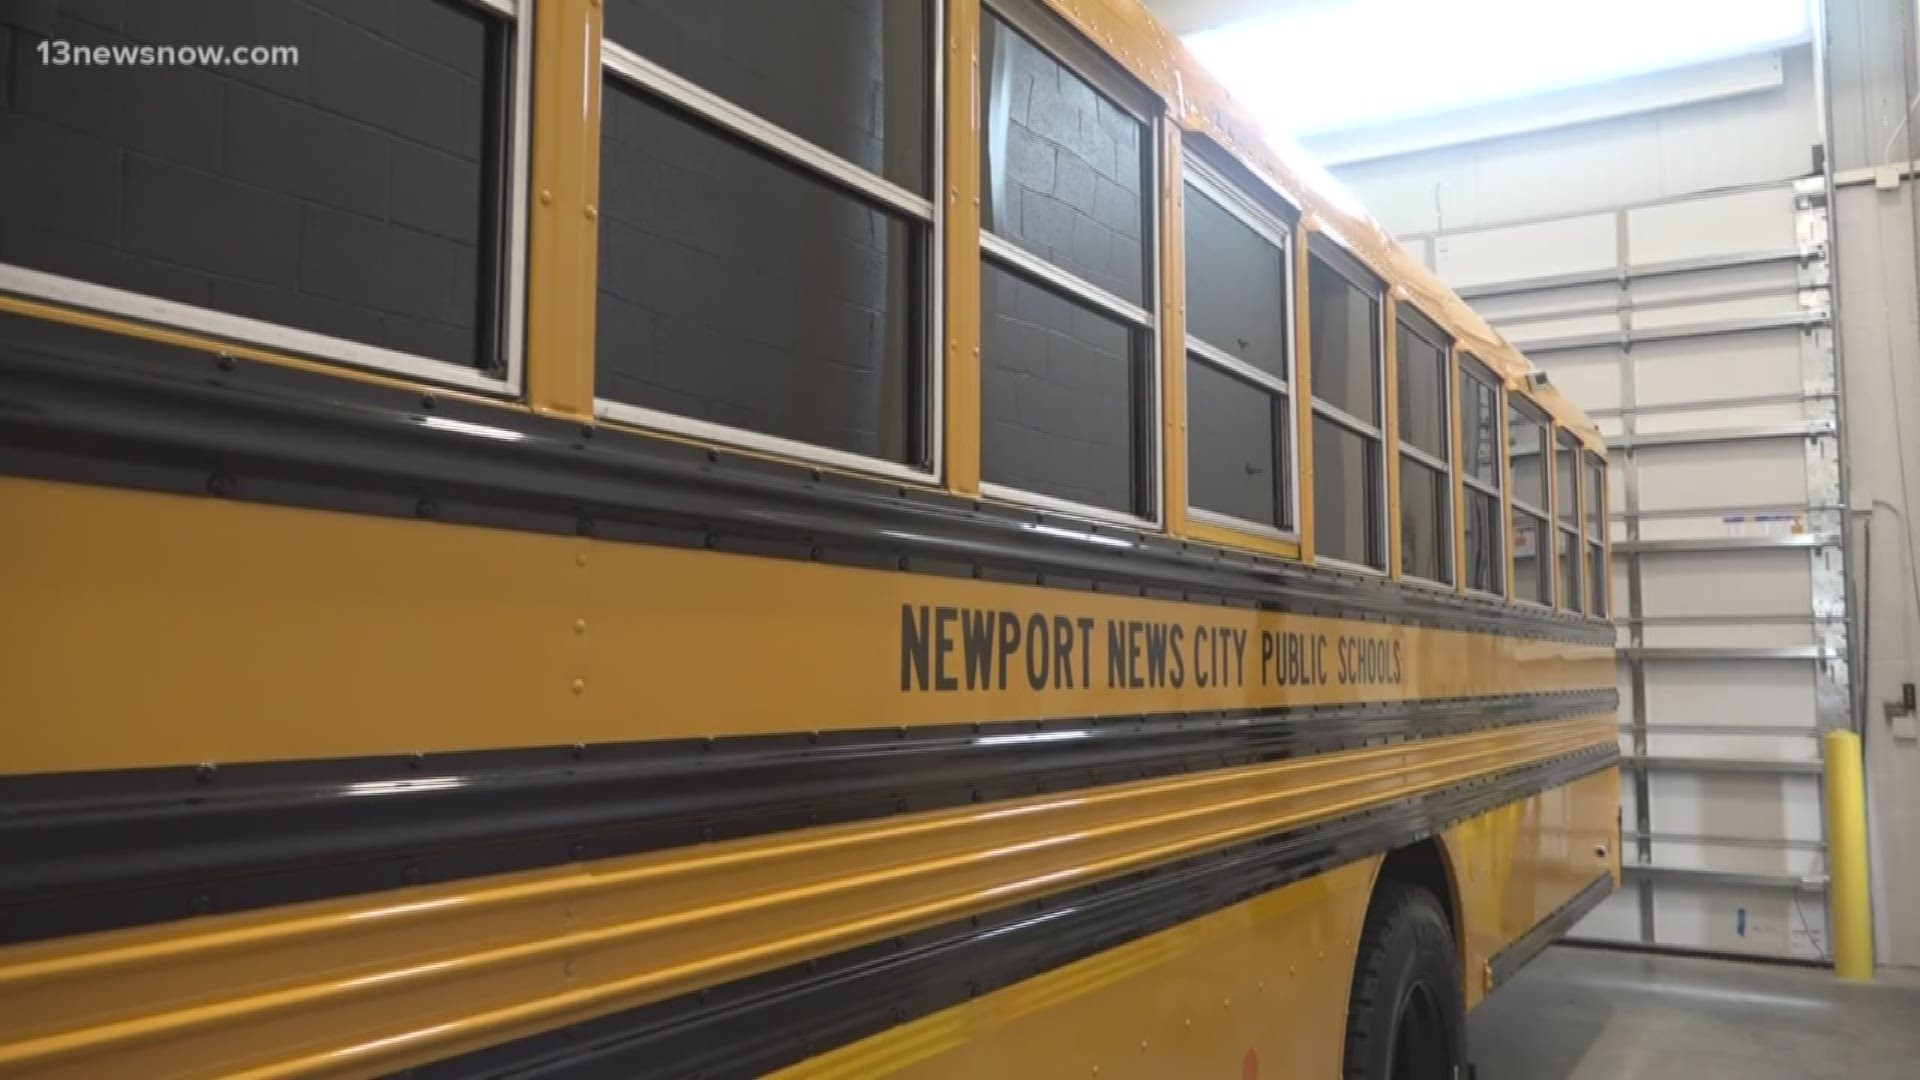 The propane-fueled buses are quieter, save money and are cleaner for the environment. So far, 62 of the 335 buses for Newport News Public Schools are propane-fueled.